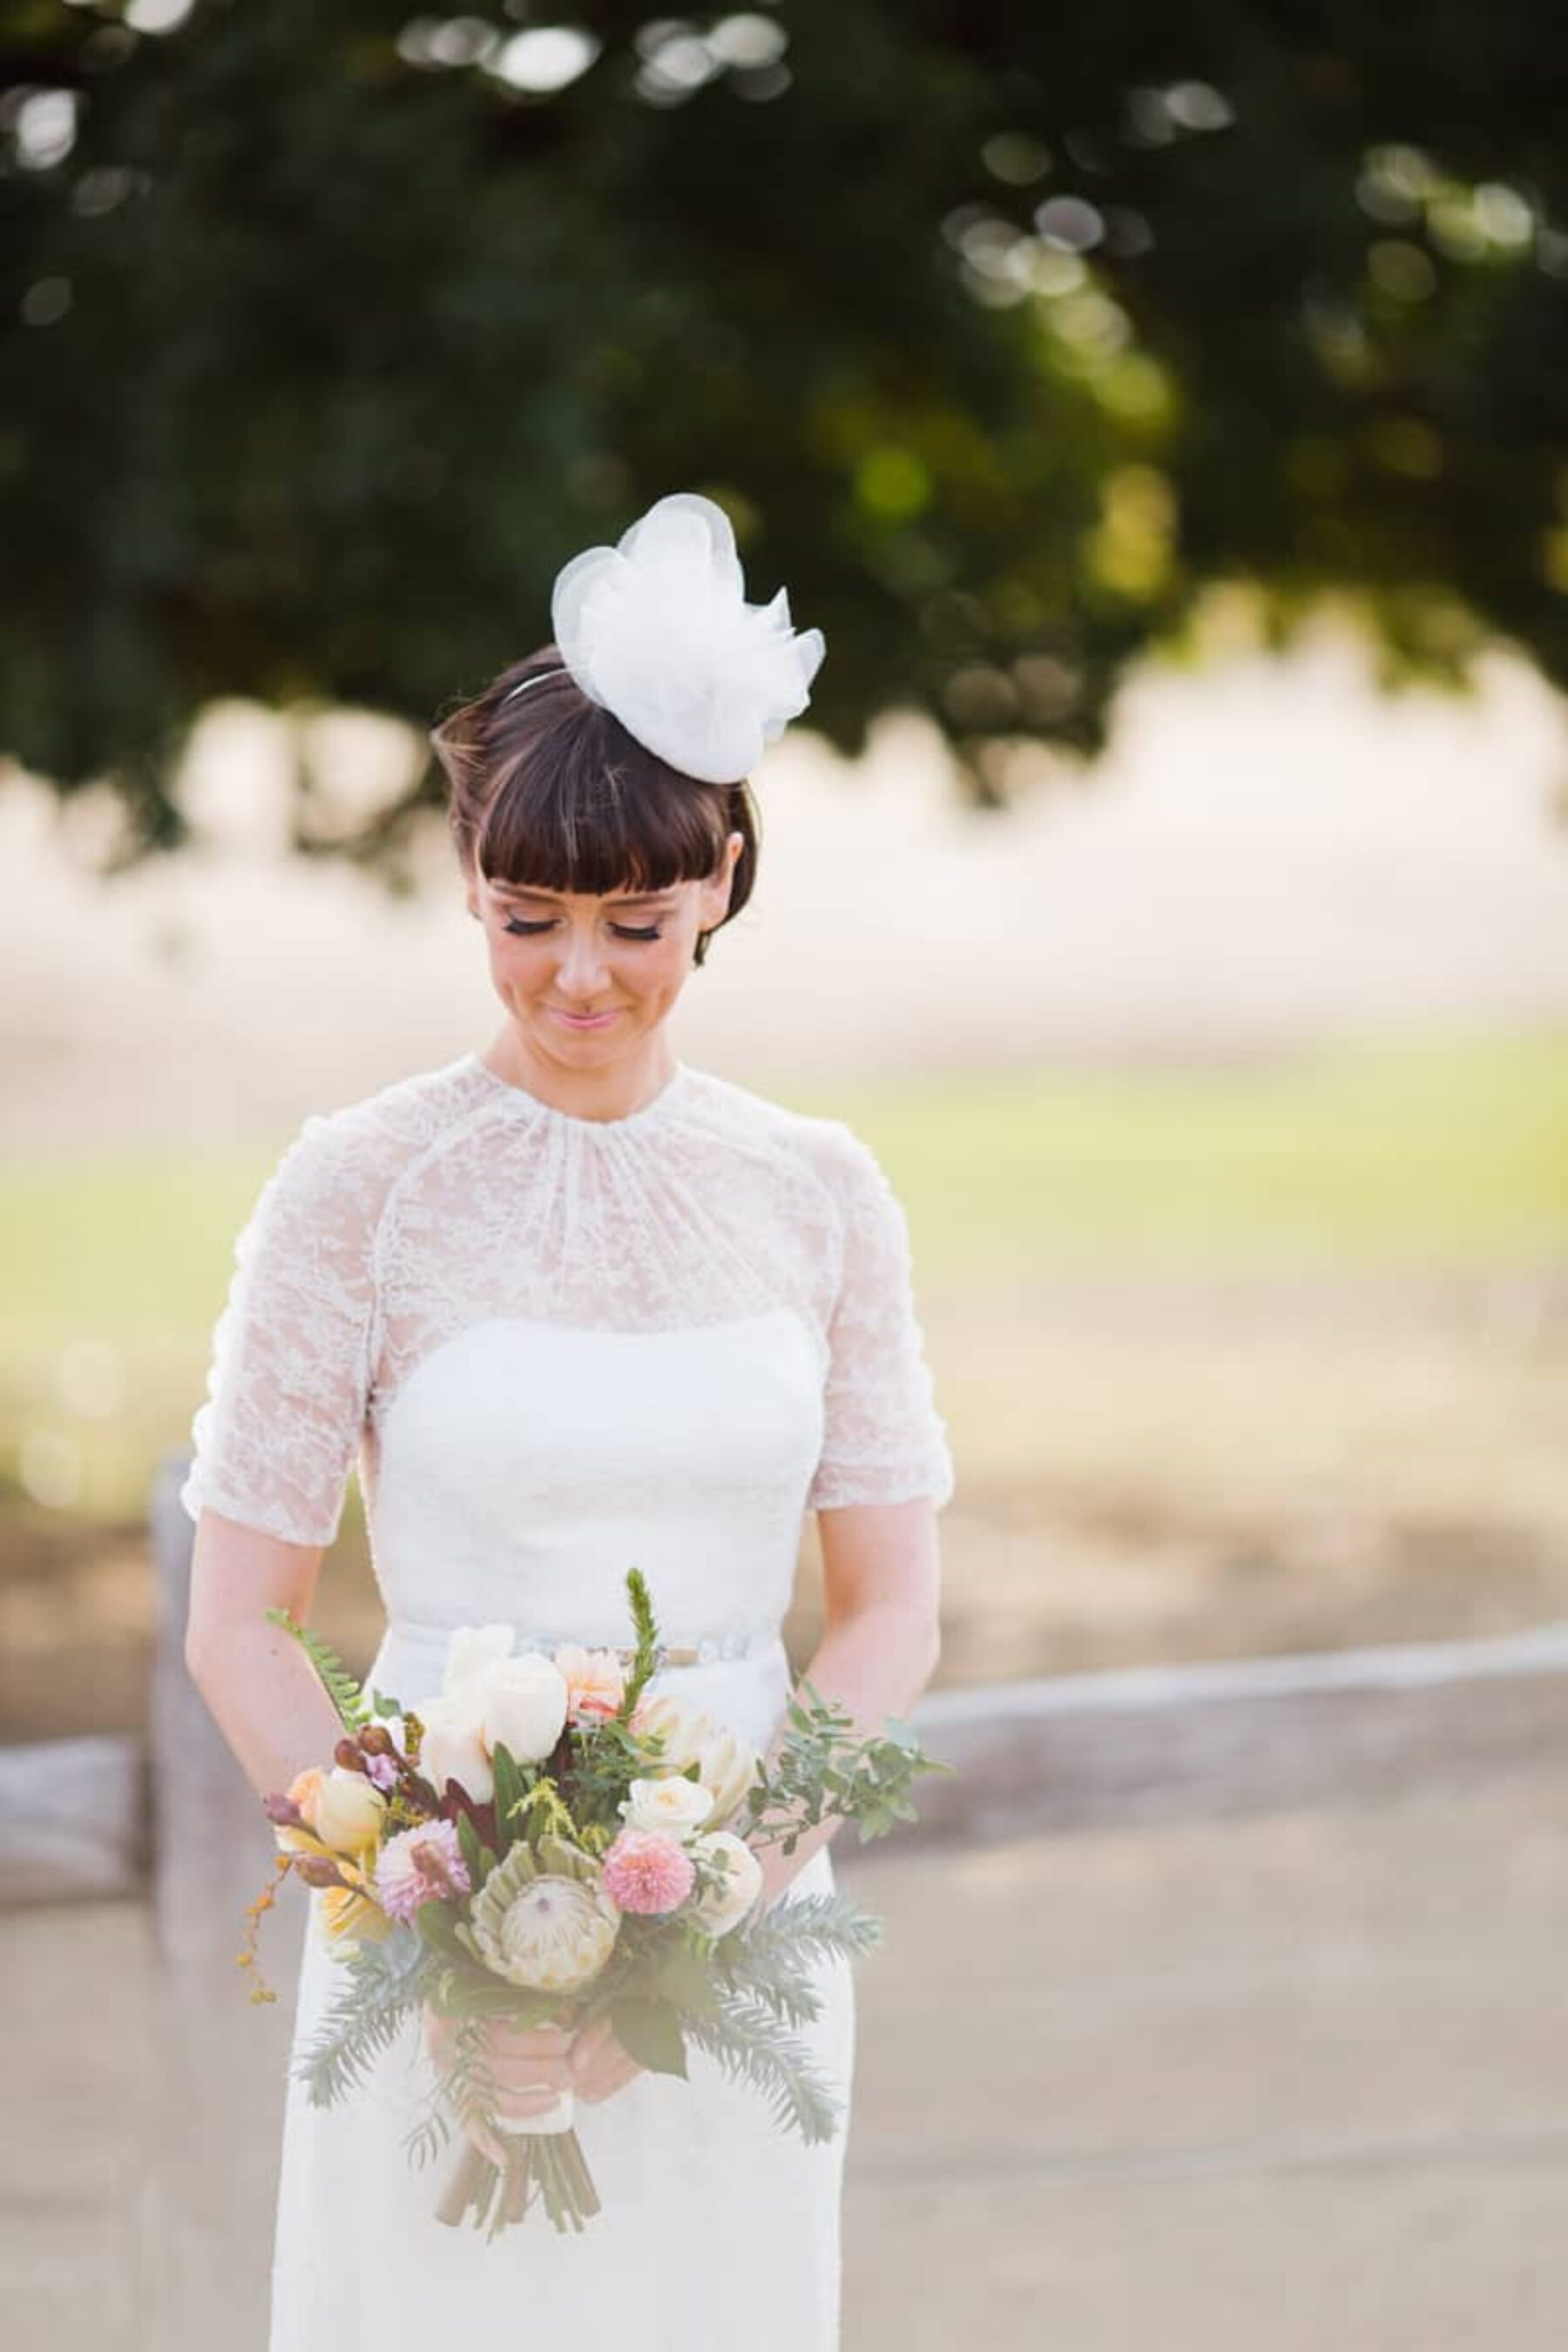 Colourful McLaren Vale wedding | Photography by Kate Pardey